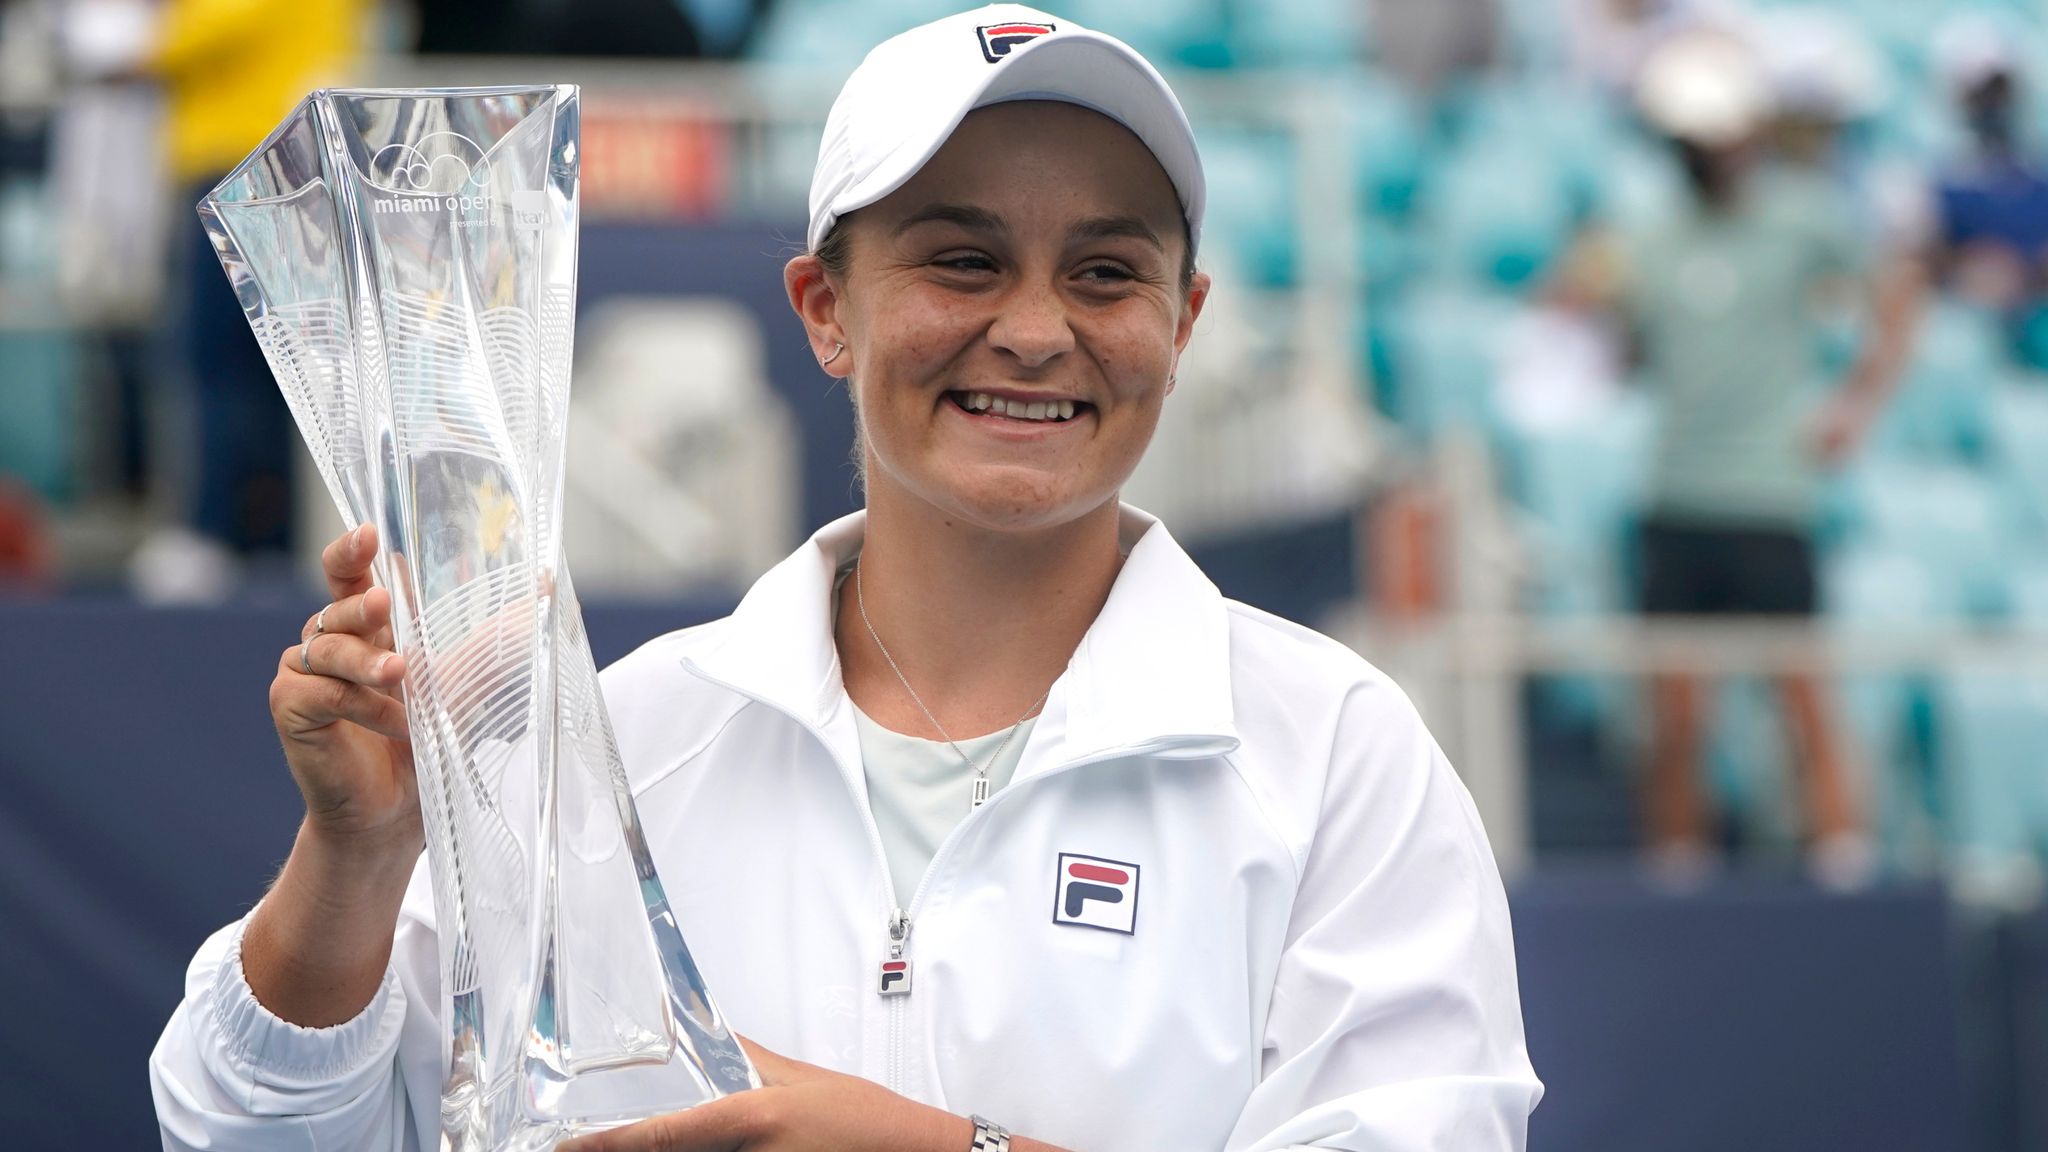 Miami Open: Ashleigh Barty retains title after Bianca Andreescu retires  injured | Tennis News | Sky Sports